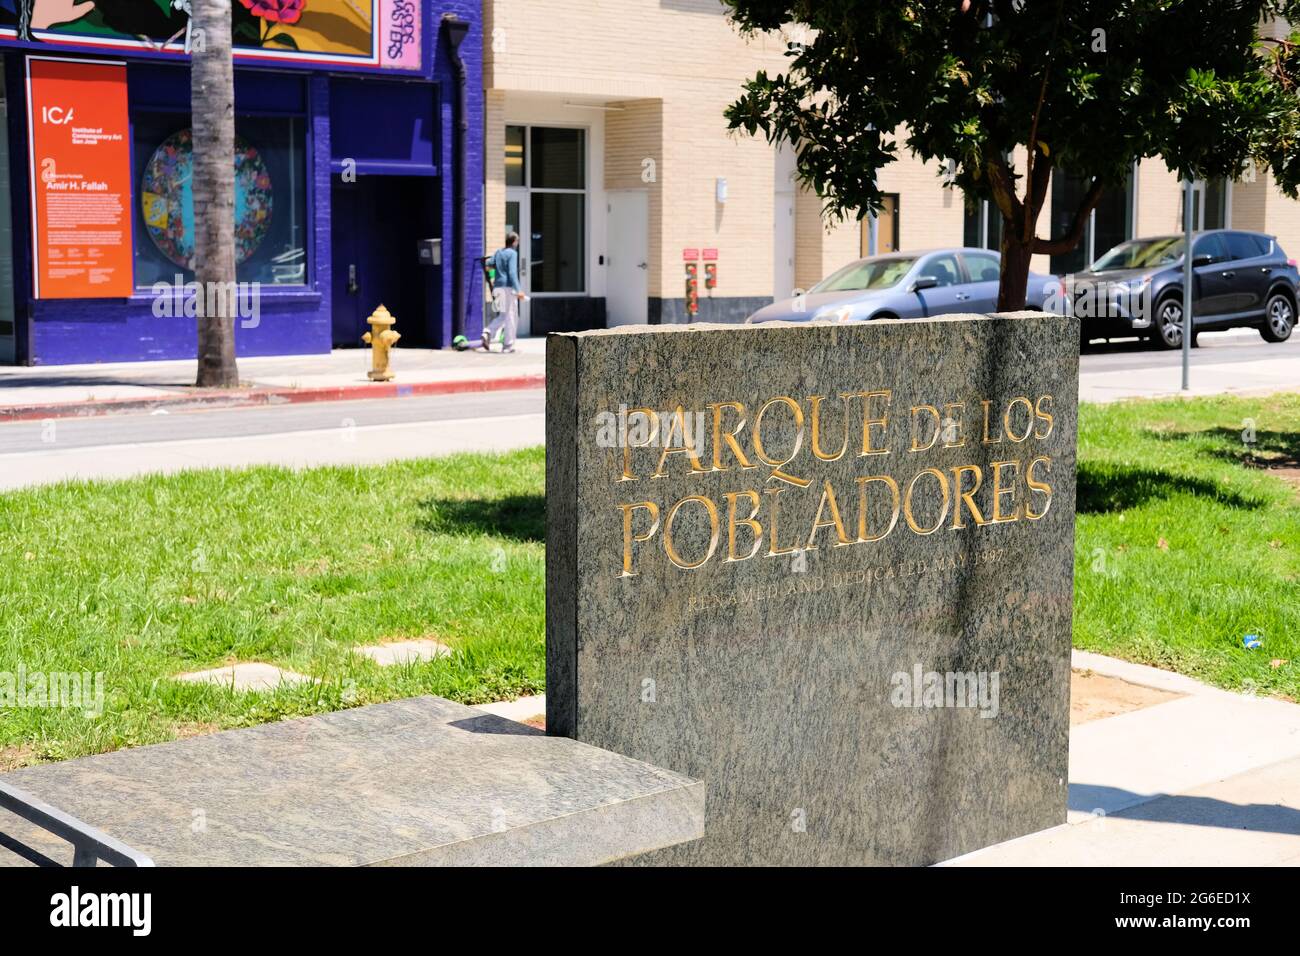 Parque de los Pobladores park in downtown San Jose, California commemorating the city's founders that came to California on the 1776 Anza Expedition. Stock Photo